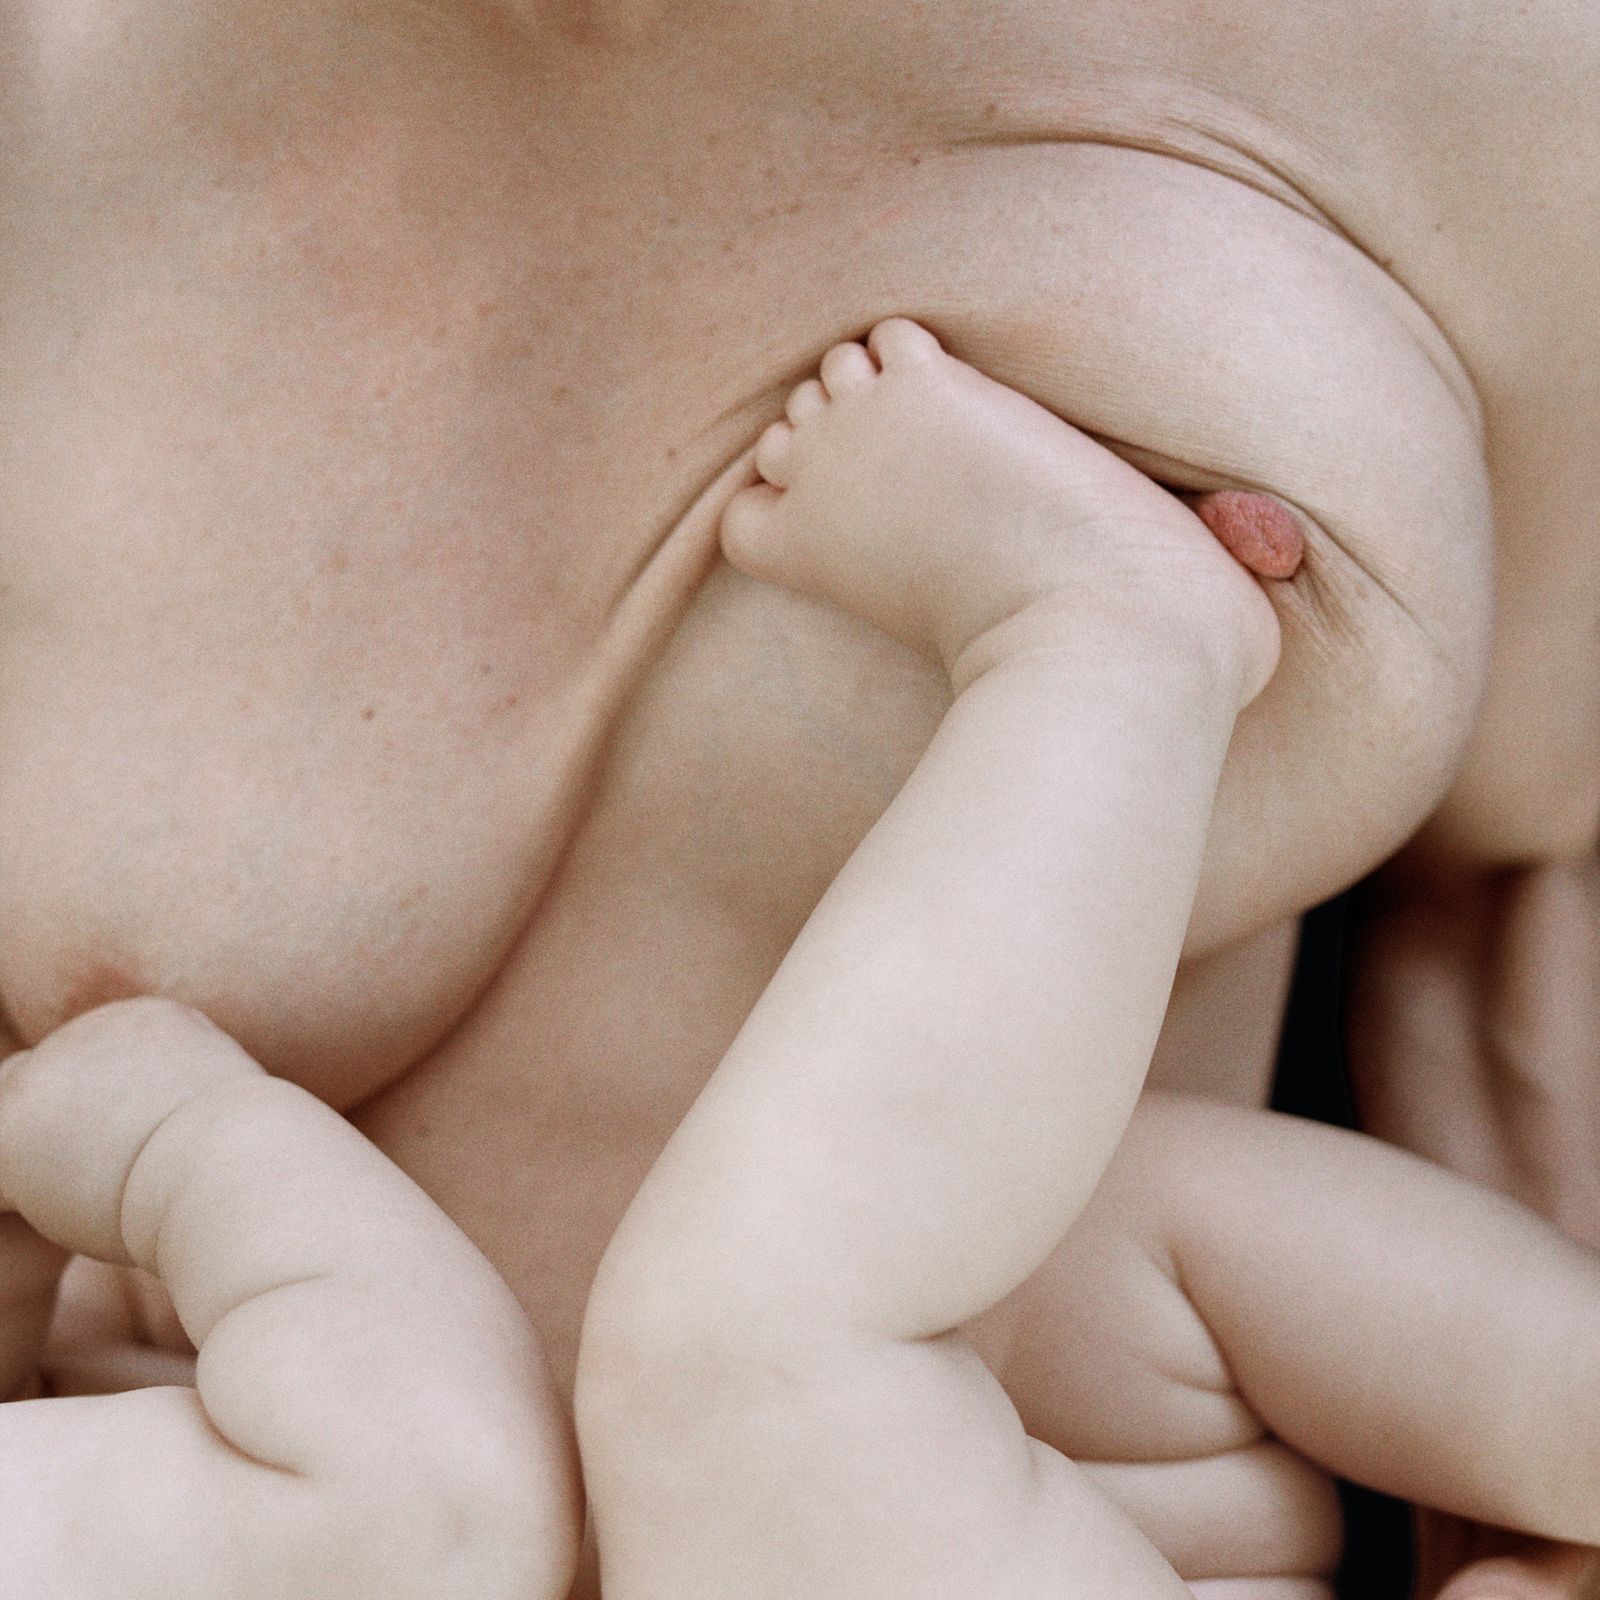 © Sophie Ebrard - Image from the I DIDN'T WANT TO BE A MUM photography project